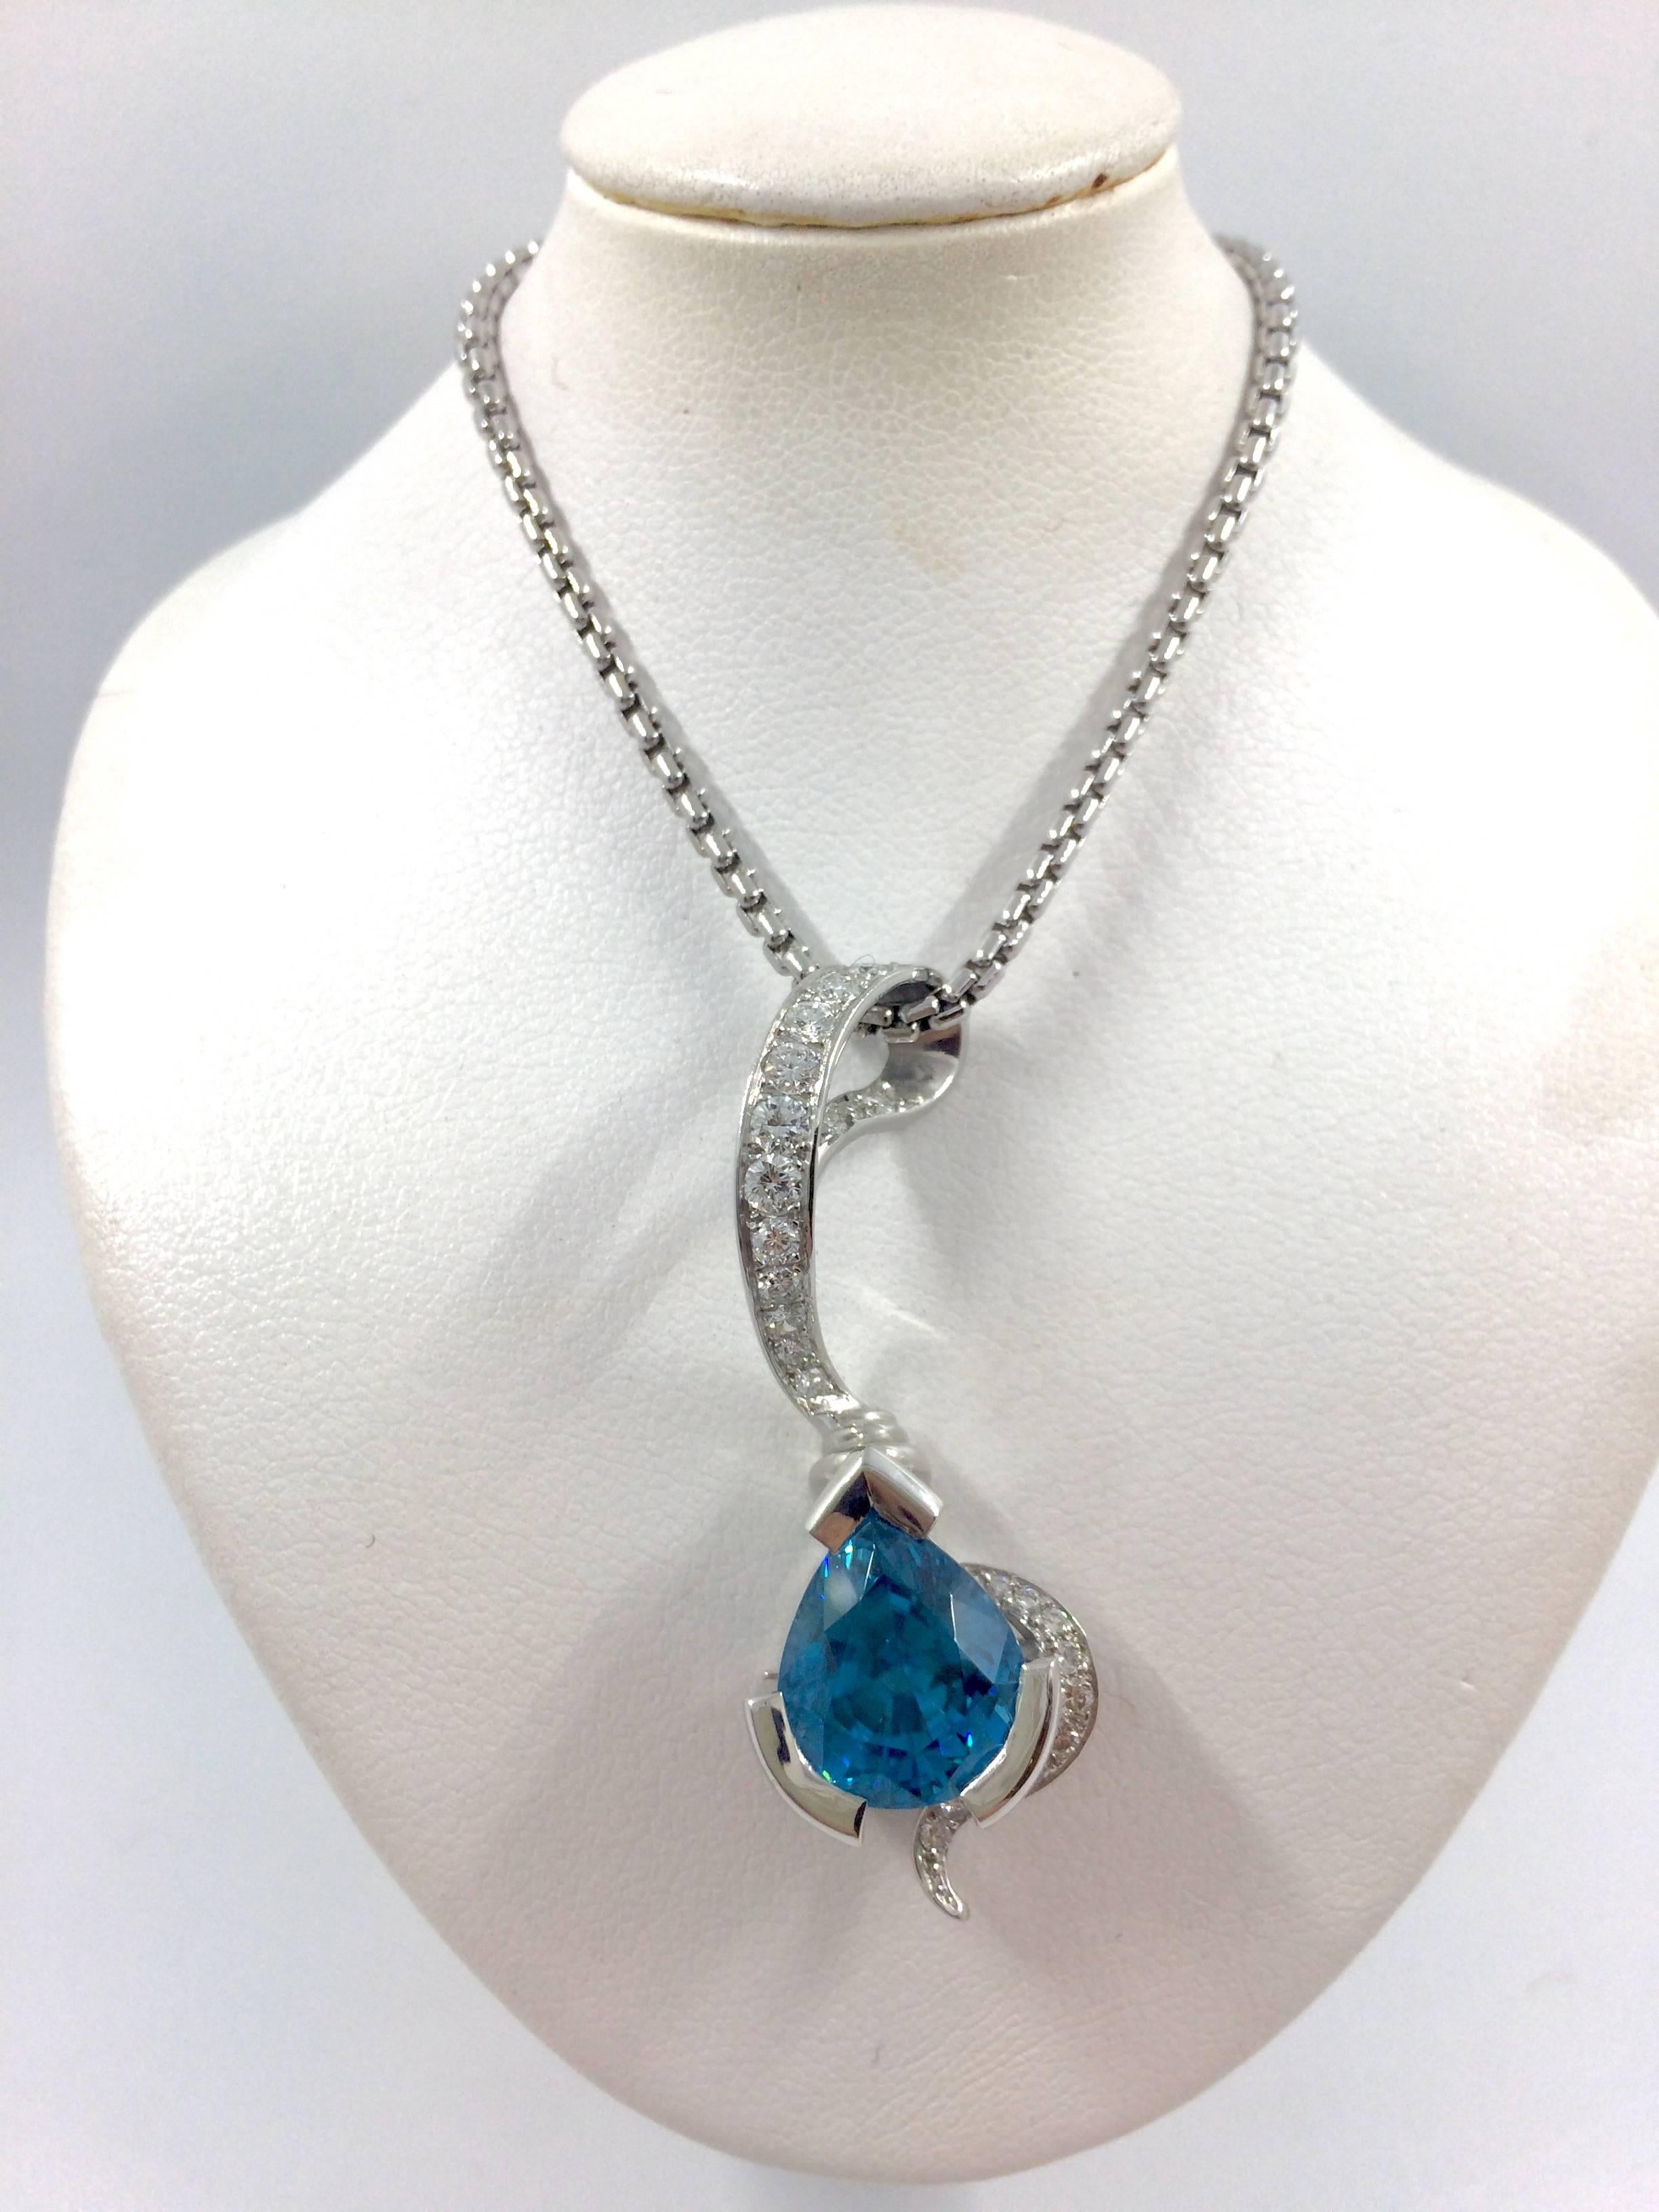 A white gold pendant set with a stunning cambodia blue zircon surrounded by brilliant cut diamonds. This unique pendant is a creation entirely handmade.
Zircon Weight: 8,66 carat
Total Diamond Weight: 0,69 carat
Diamonds Quality: E/VVS
Net